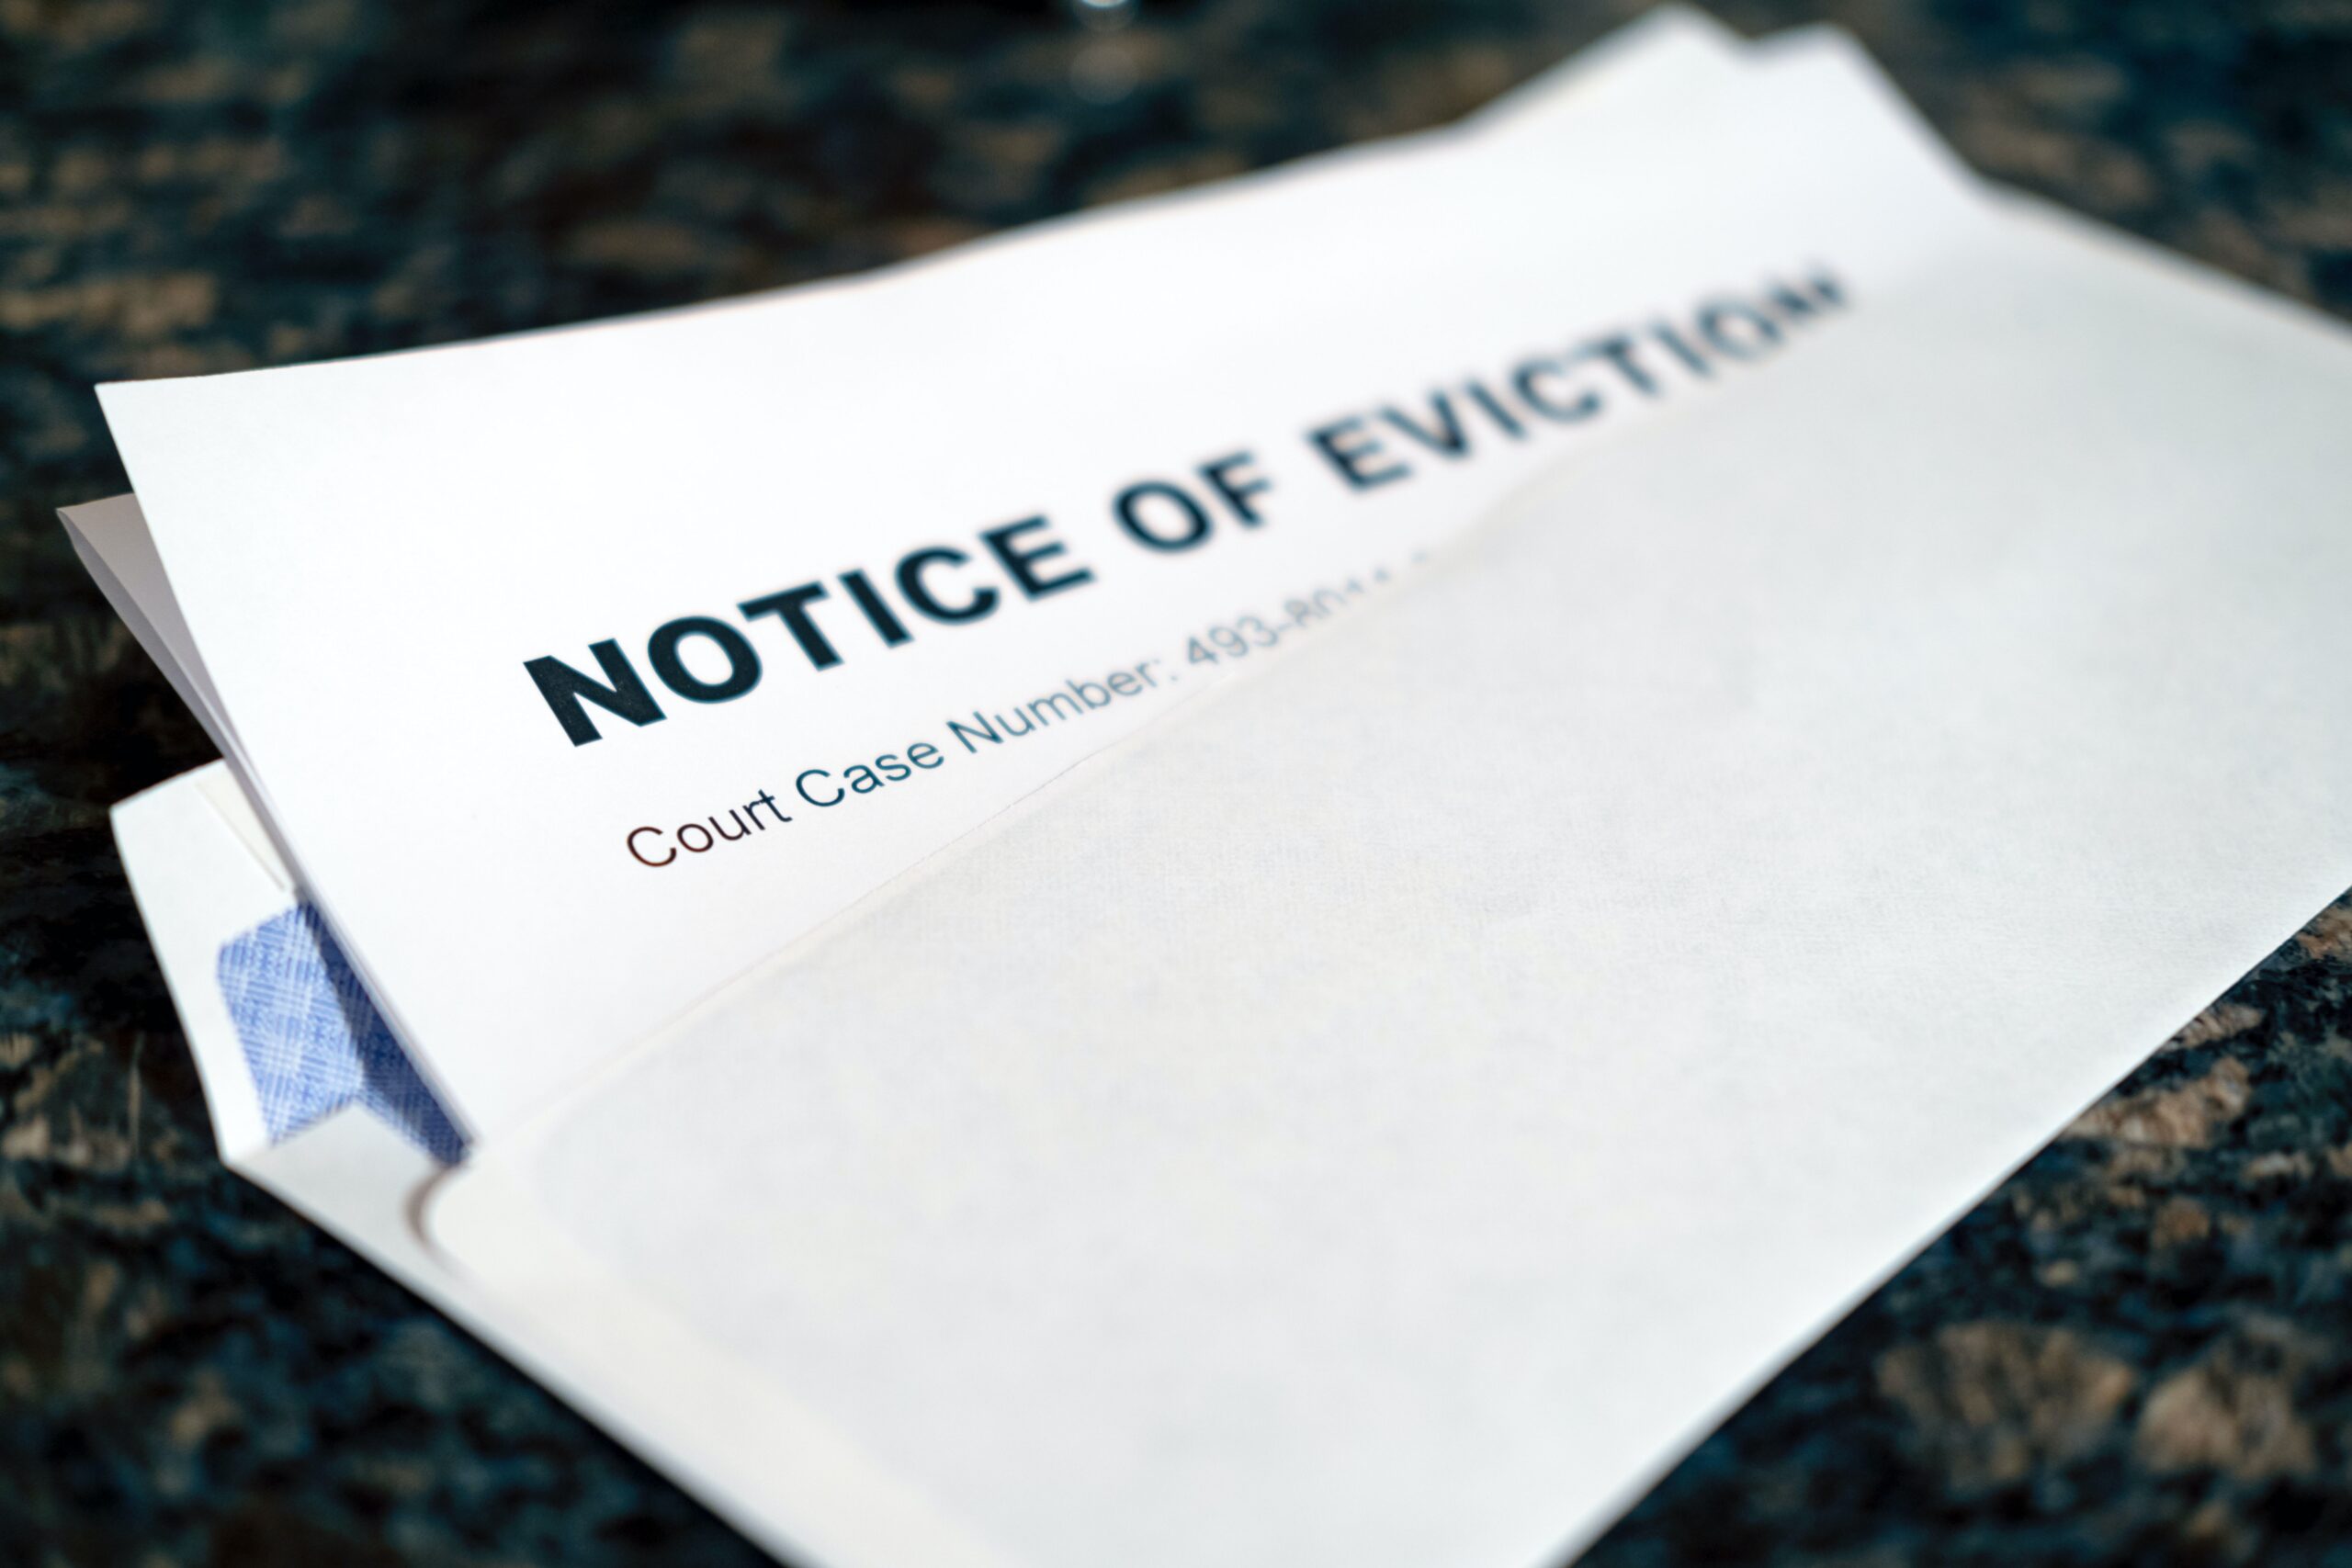 An eviction notice, sticking out of a white business envelope, slightly slanted. The top of the paper is visible with the words in caps "NOTICE OF EVICTION" visible, underneath the words "Court Case Number" is visible but the subsequent number is hidden by the envelope.